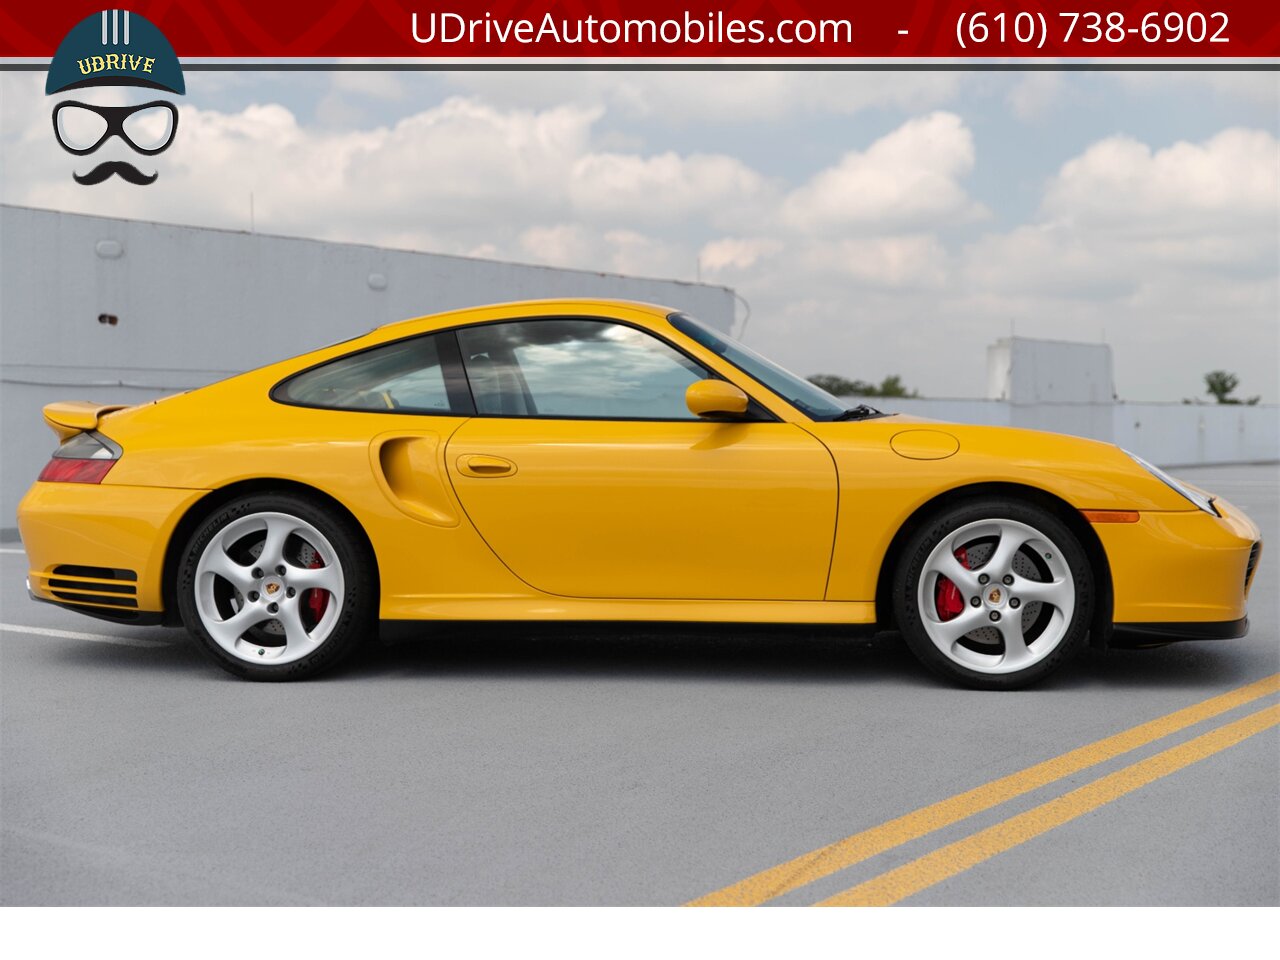 2003 Porsche 911 996 Turbo X50 6Sp Nephrite Green Lthr 9k Miles  Deviating Yellow Stitching Collector Grade BACK AGAIN - Photo 14 - West Chester, PA 19382